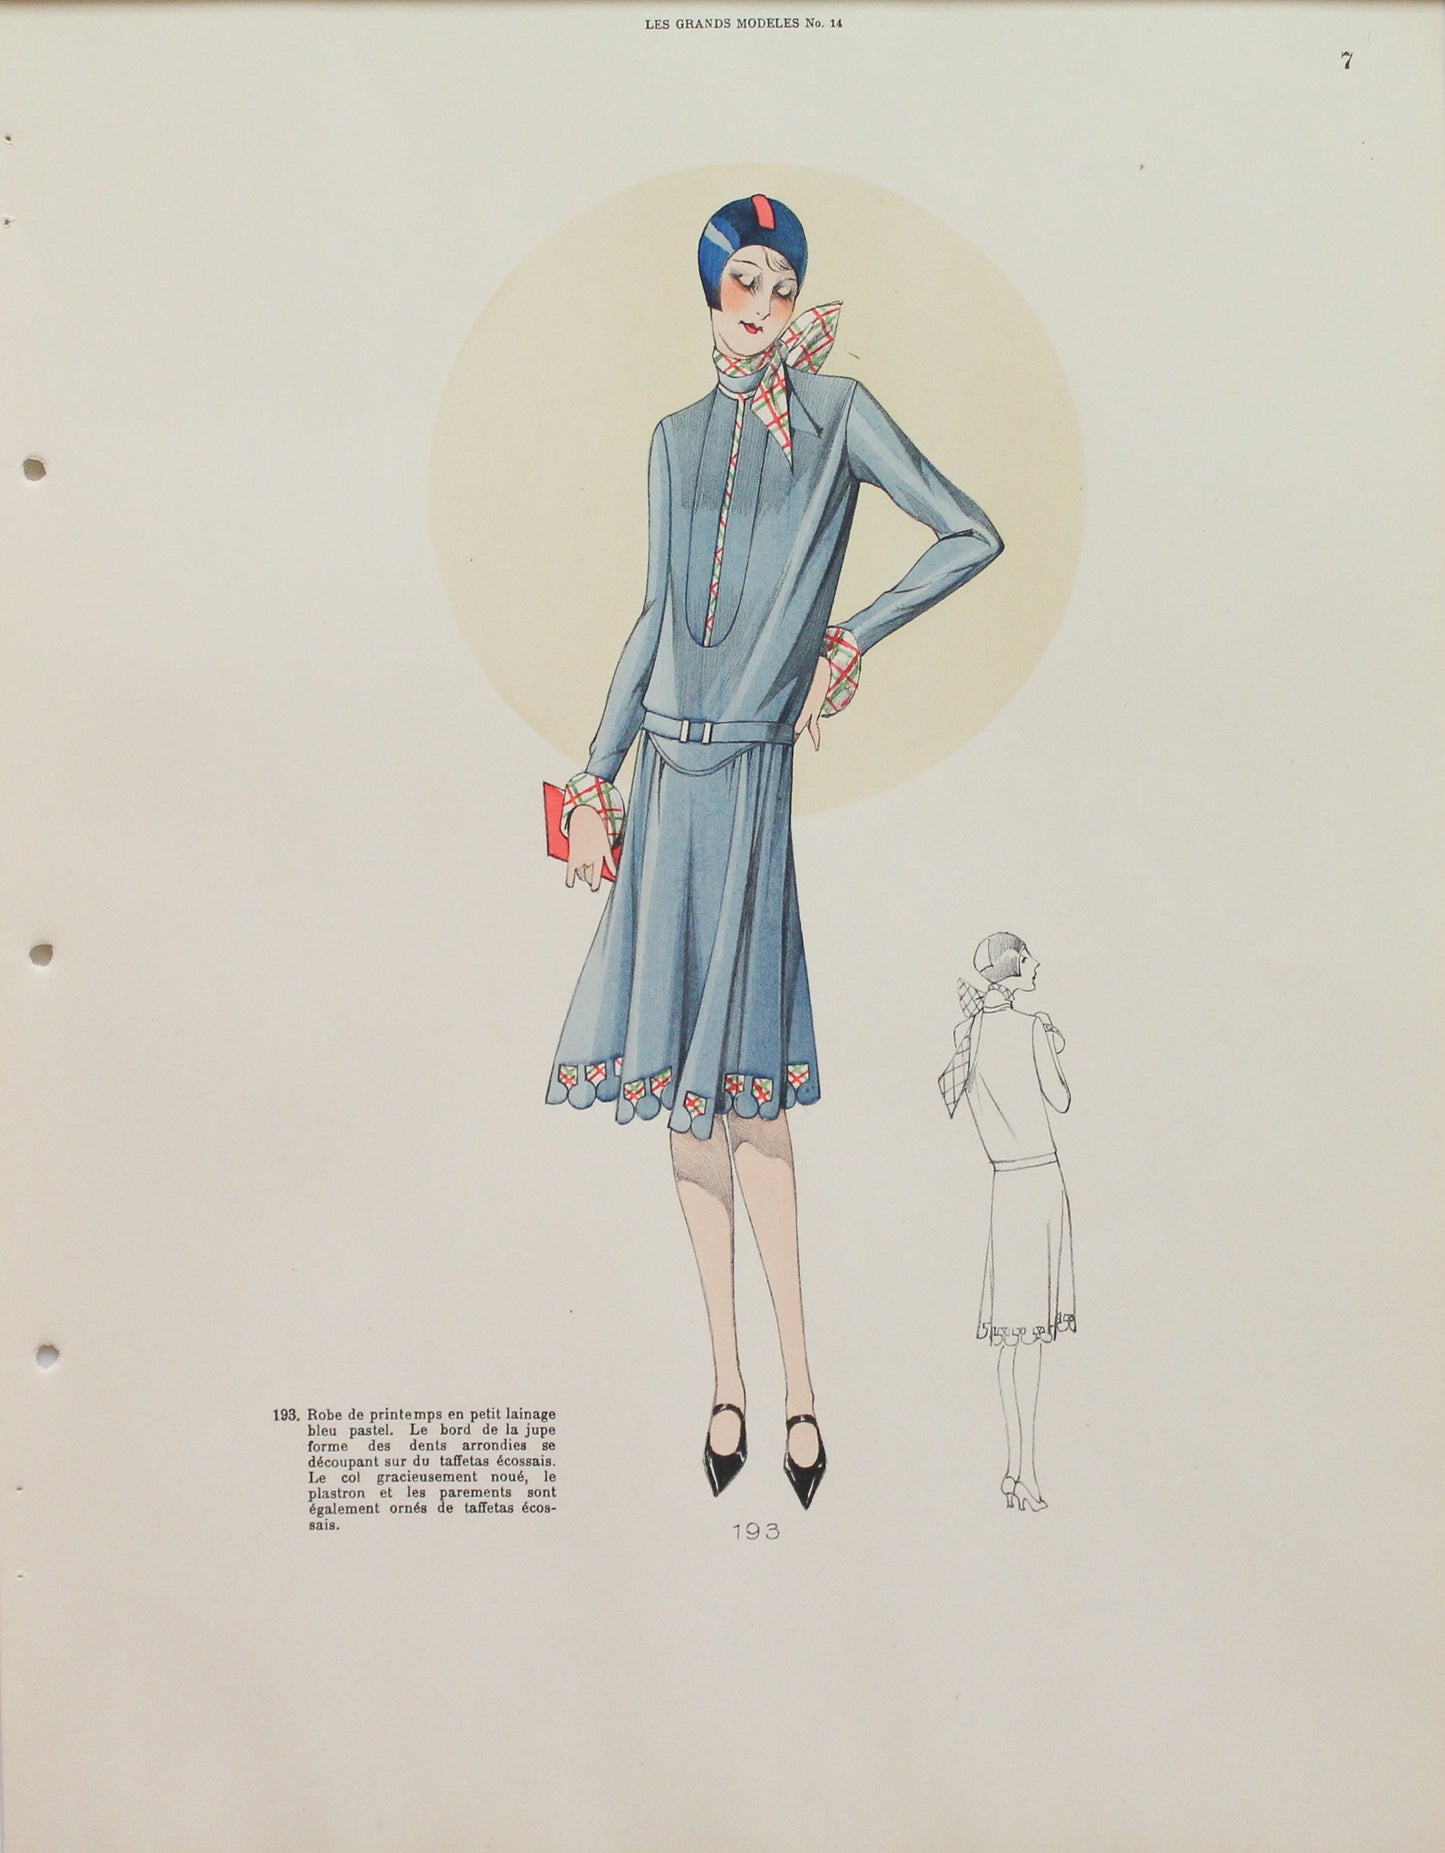 Fashion, French, Les Grands Modeles, No 14, Style Number 193, 1920s